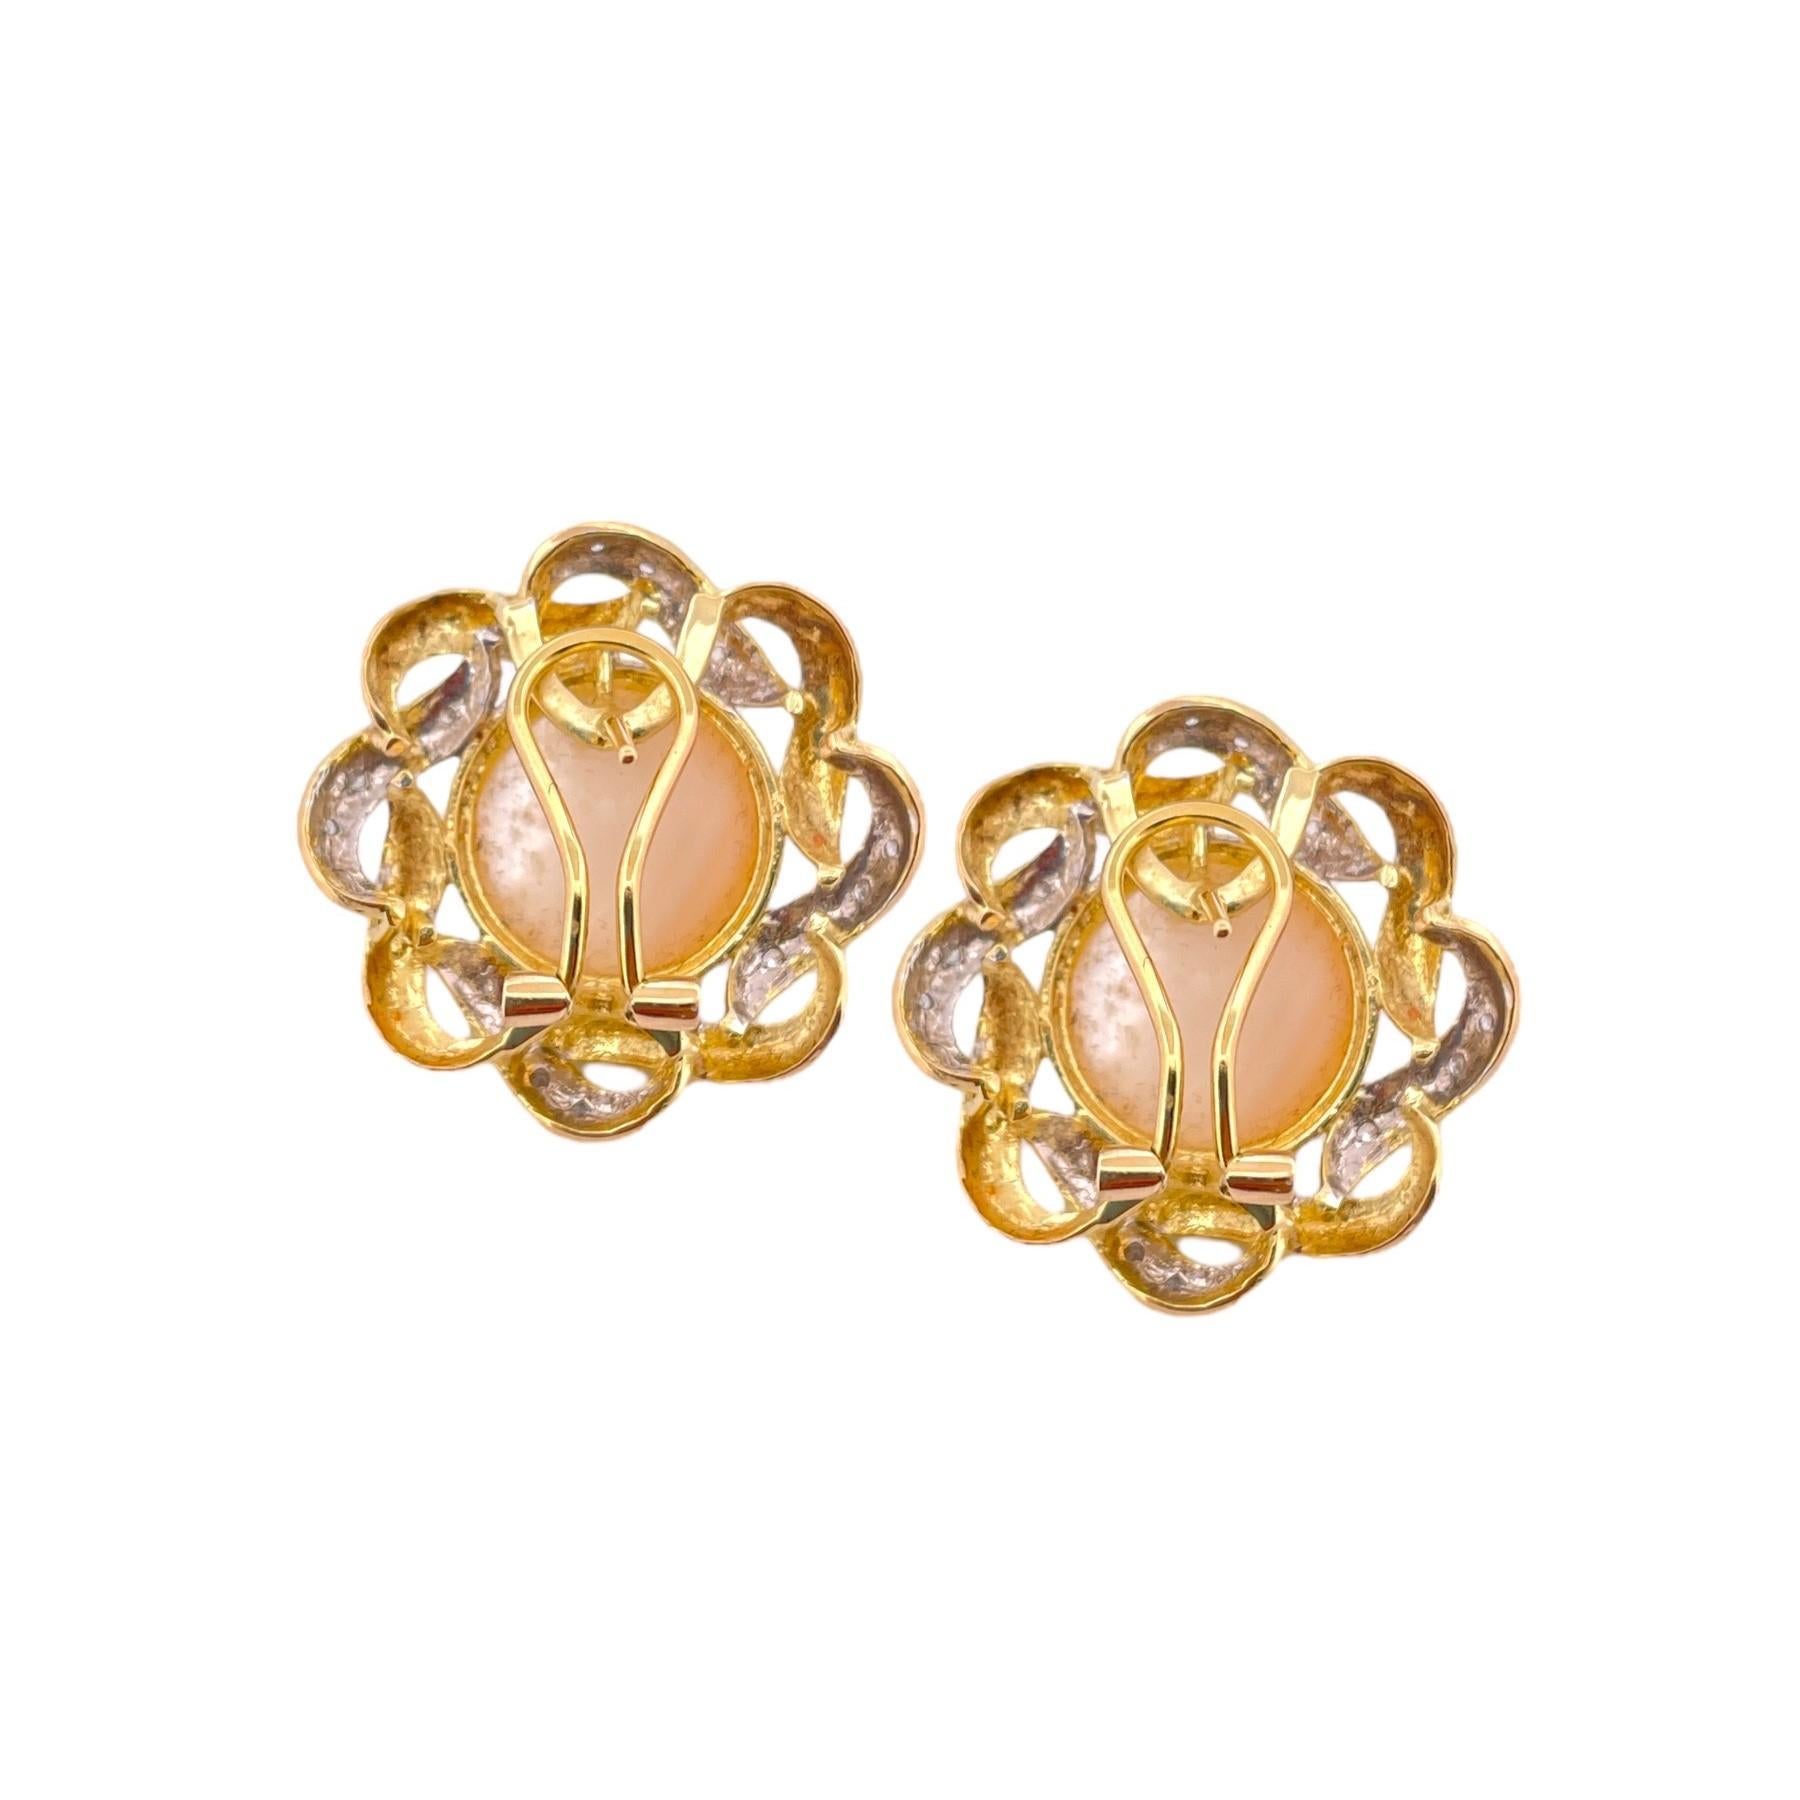 Brilliant Cut Mabe Pearl and Diamond Earrings - 14K Yellow Gold